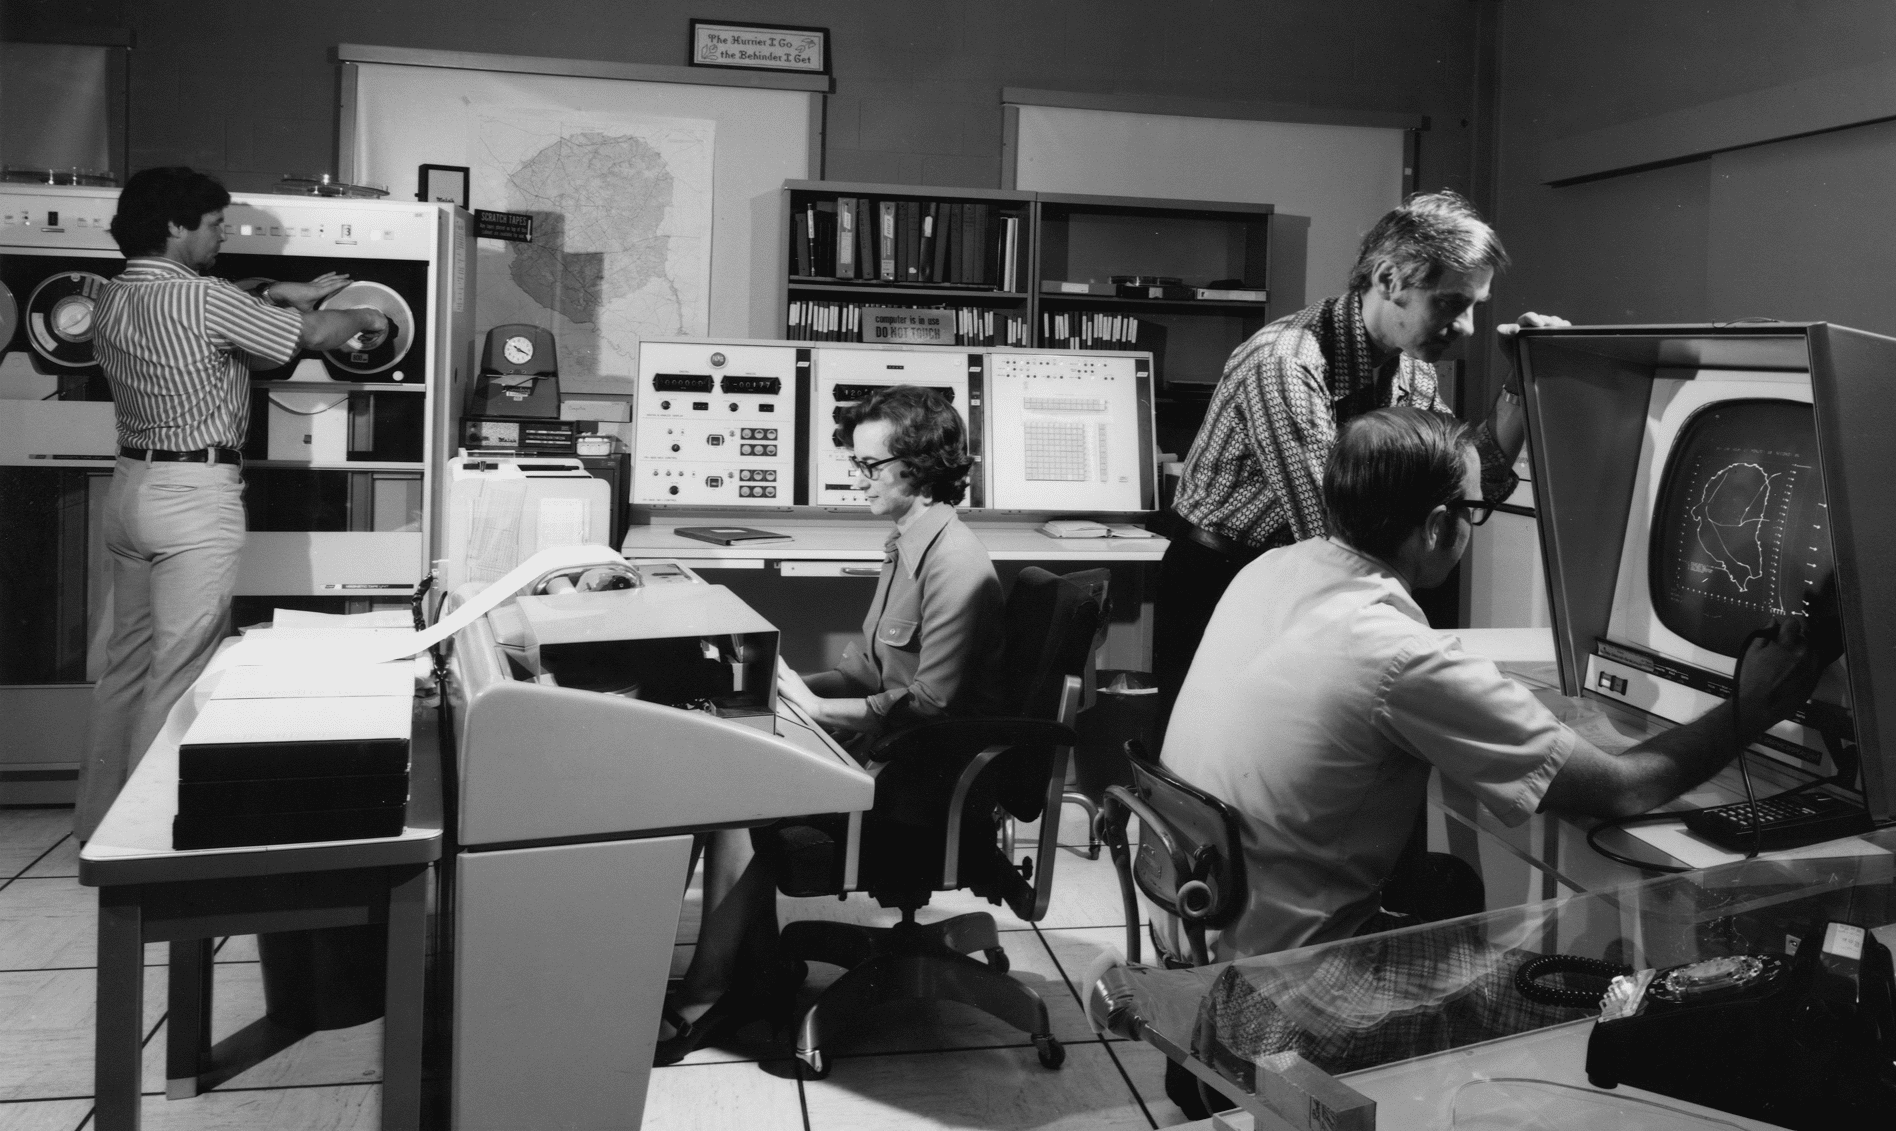 The command center of the National Atmospheric Release Advisory Center around the time it became operational after the Three Mile Island accident in March 1979. (NARAC / LLNL)